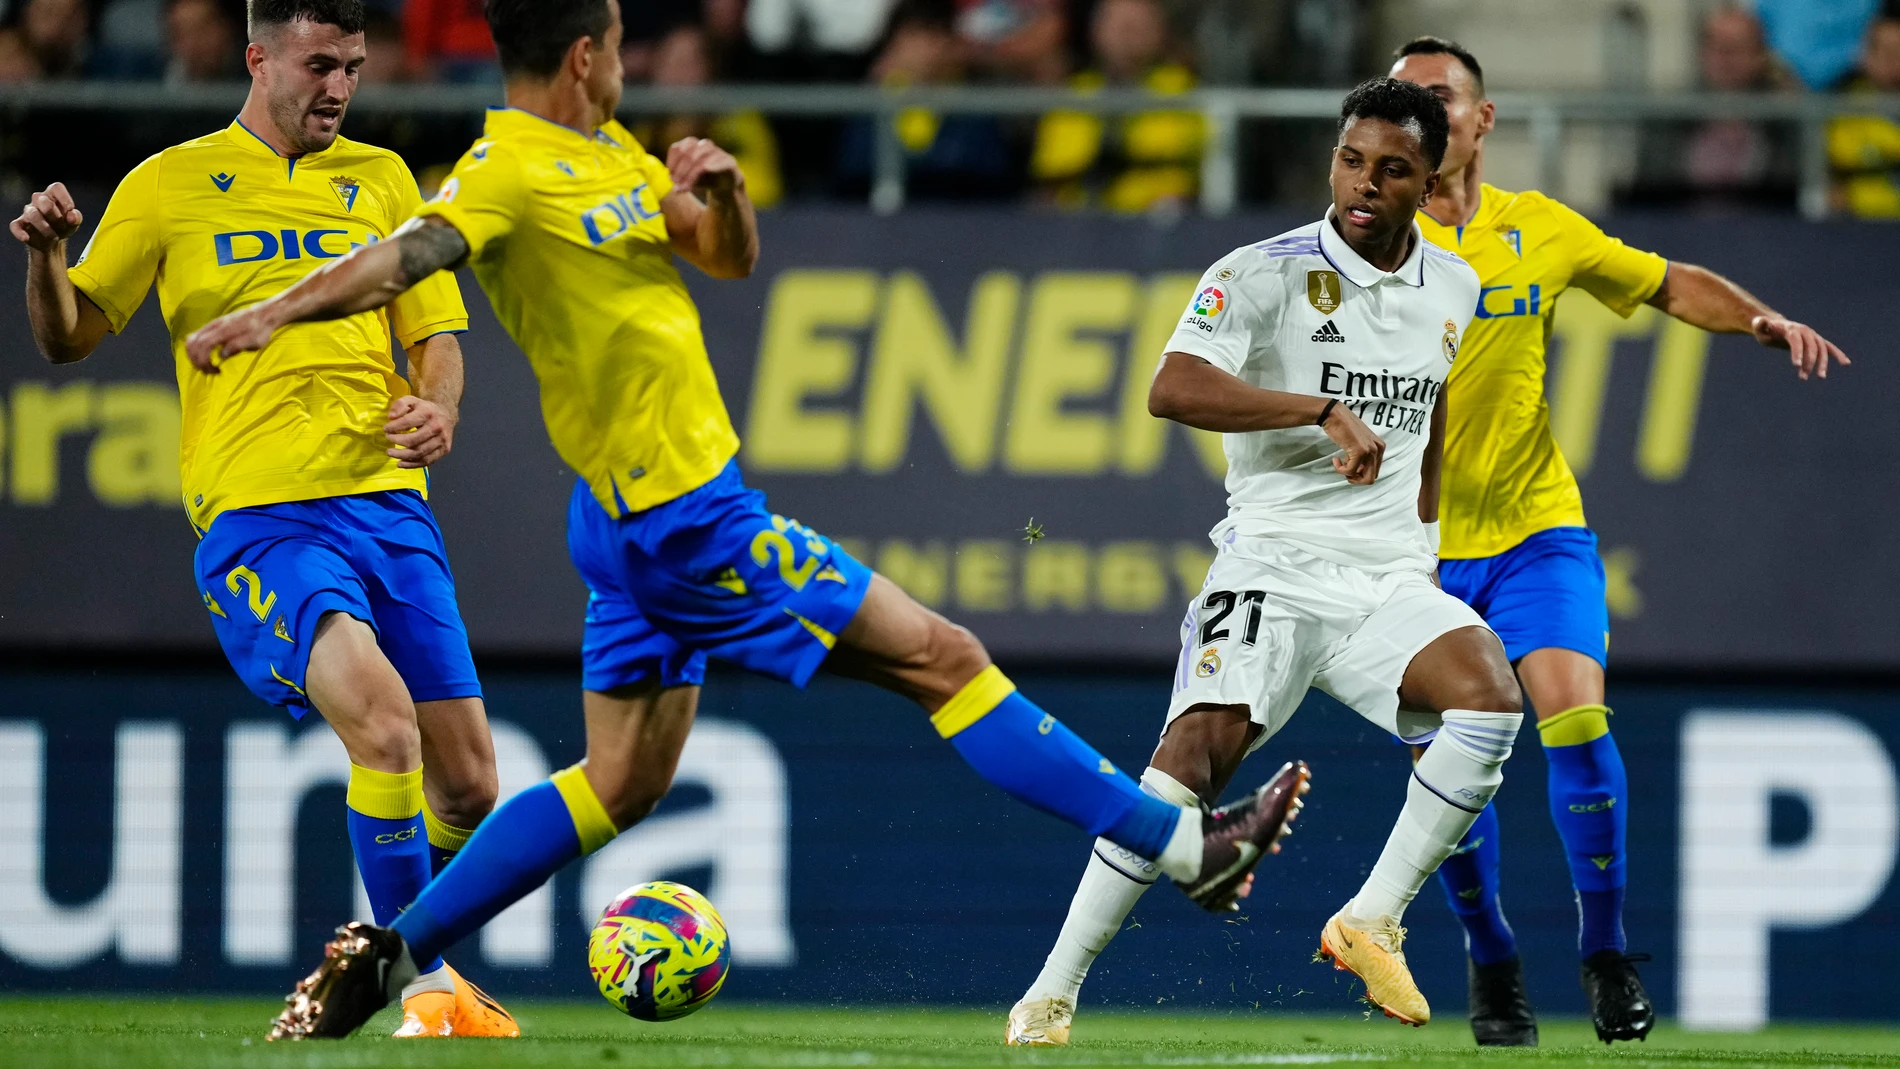 Real Madrid's Rodrygo, second from right, challenges for the ball with Cadiz's Raul Parra, left, Luis Hernandez, second from left, and Sergi Guardiola during the Spanish La Liga soccer match between Cadiz CF and Real Madrid at the Nuevo Mirandilla stadium in Cadiz, Spain, Saturday, April 15, 2023. (AP Photo/Jose Breton)